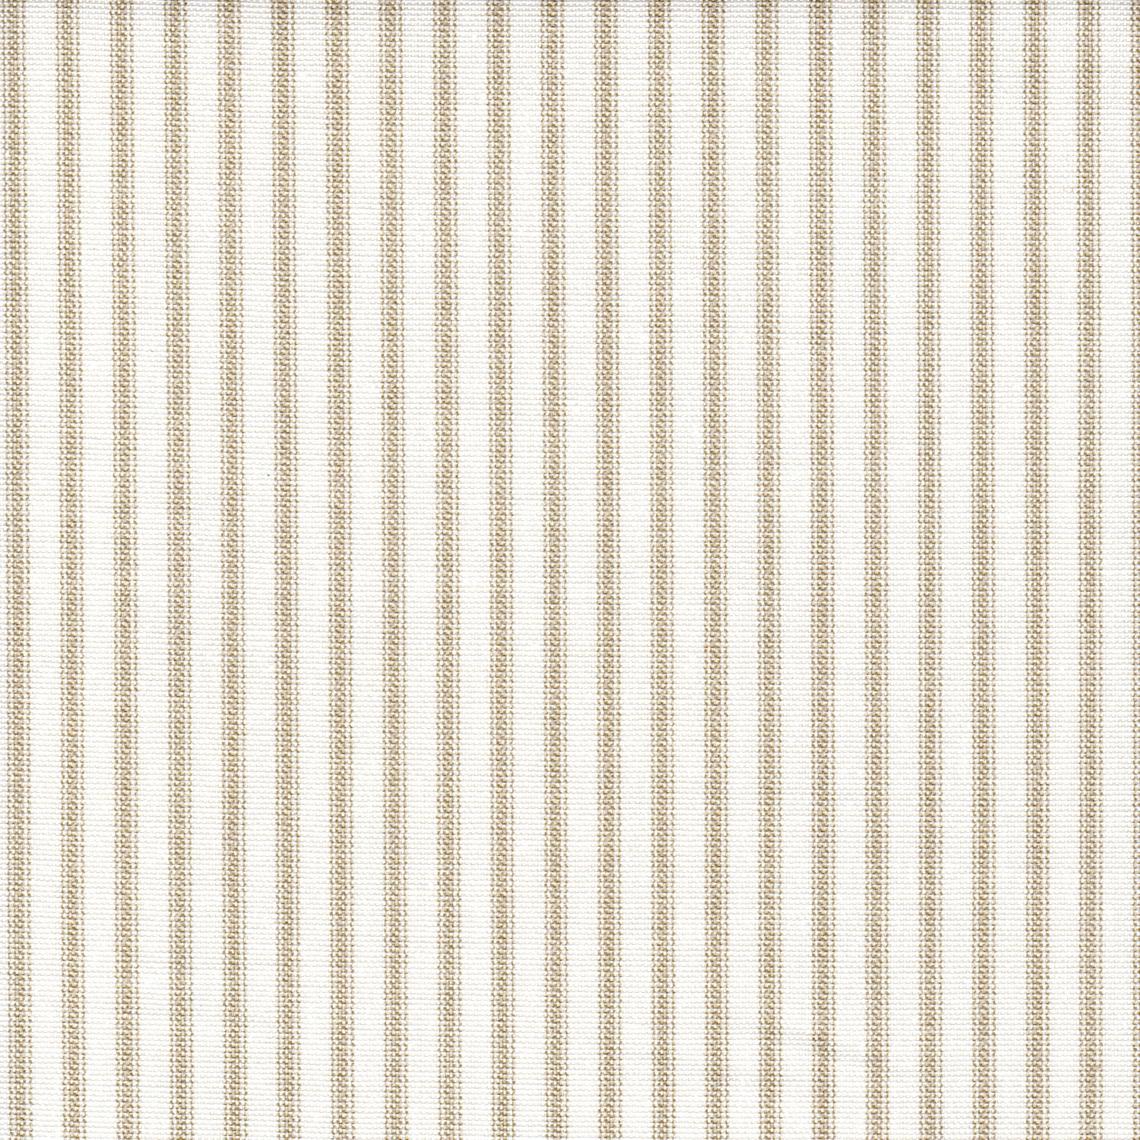 bed scarf in farmhouse sand beige traditional ticking stripe